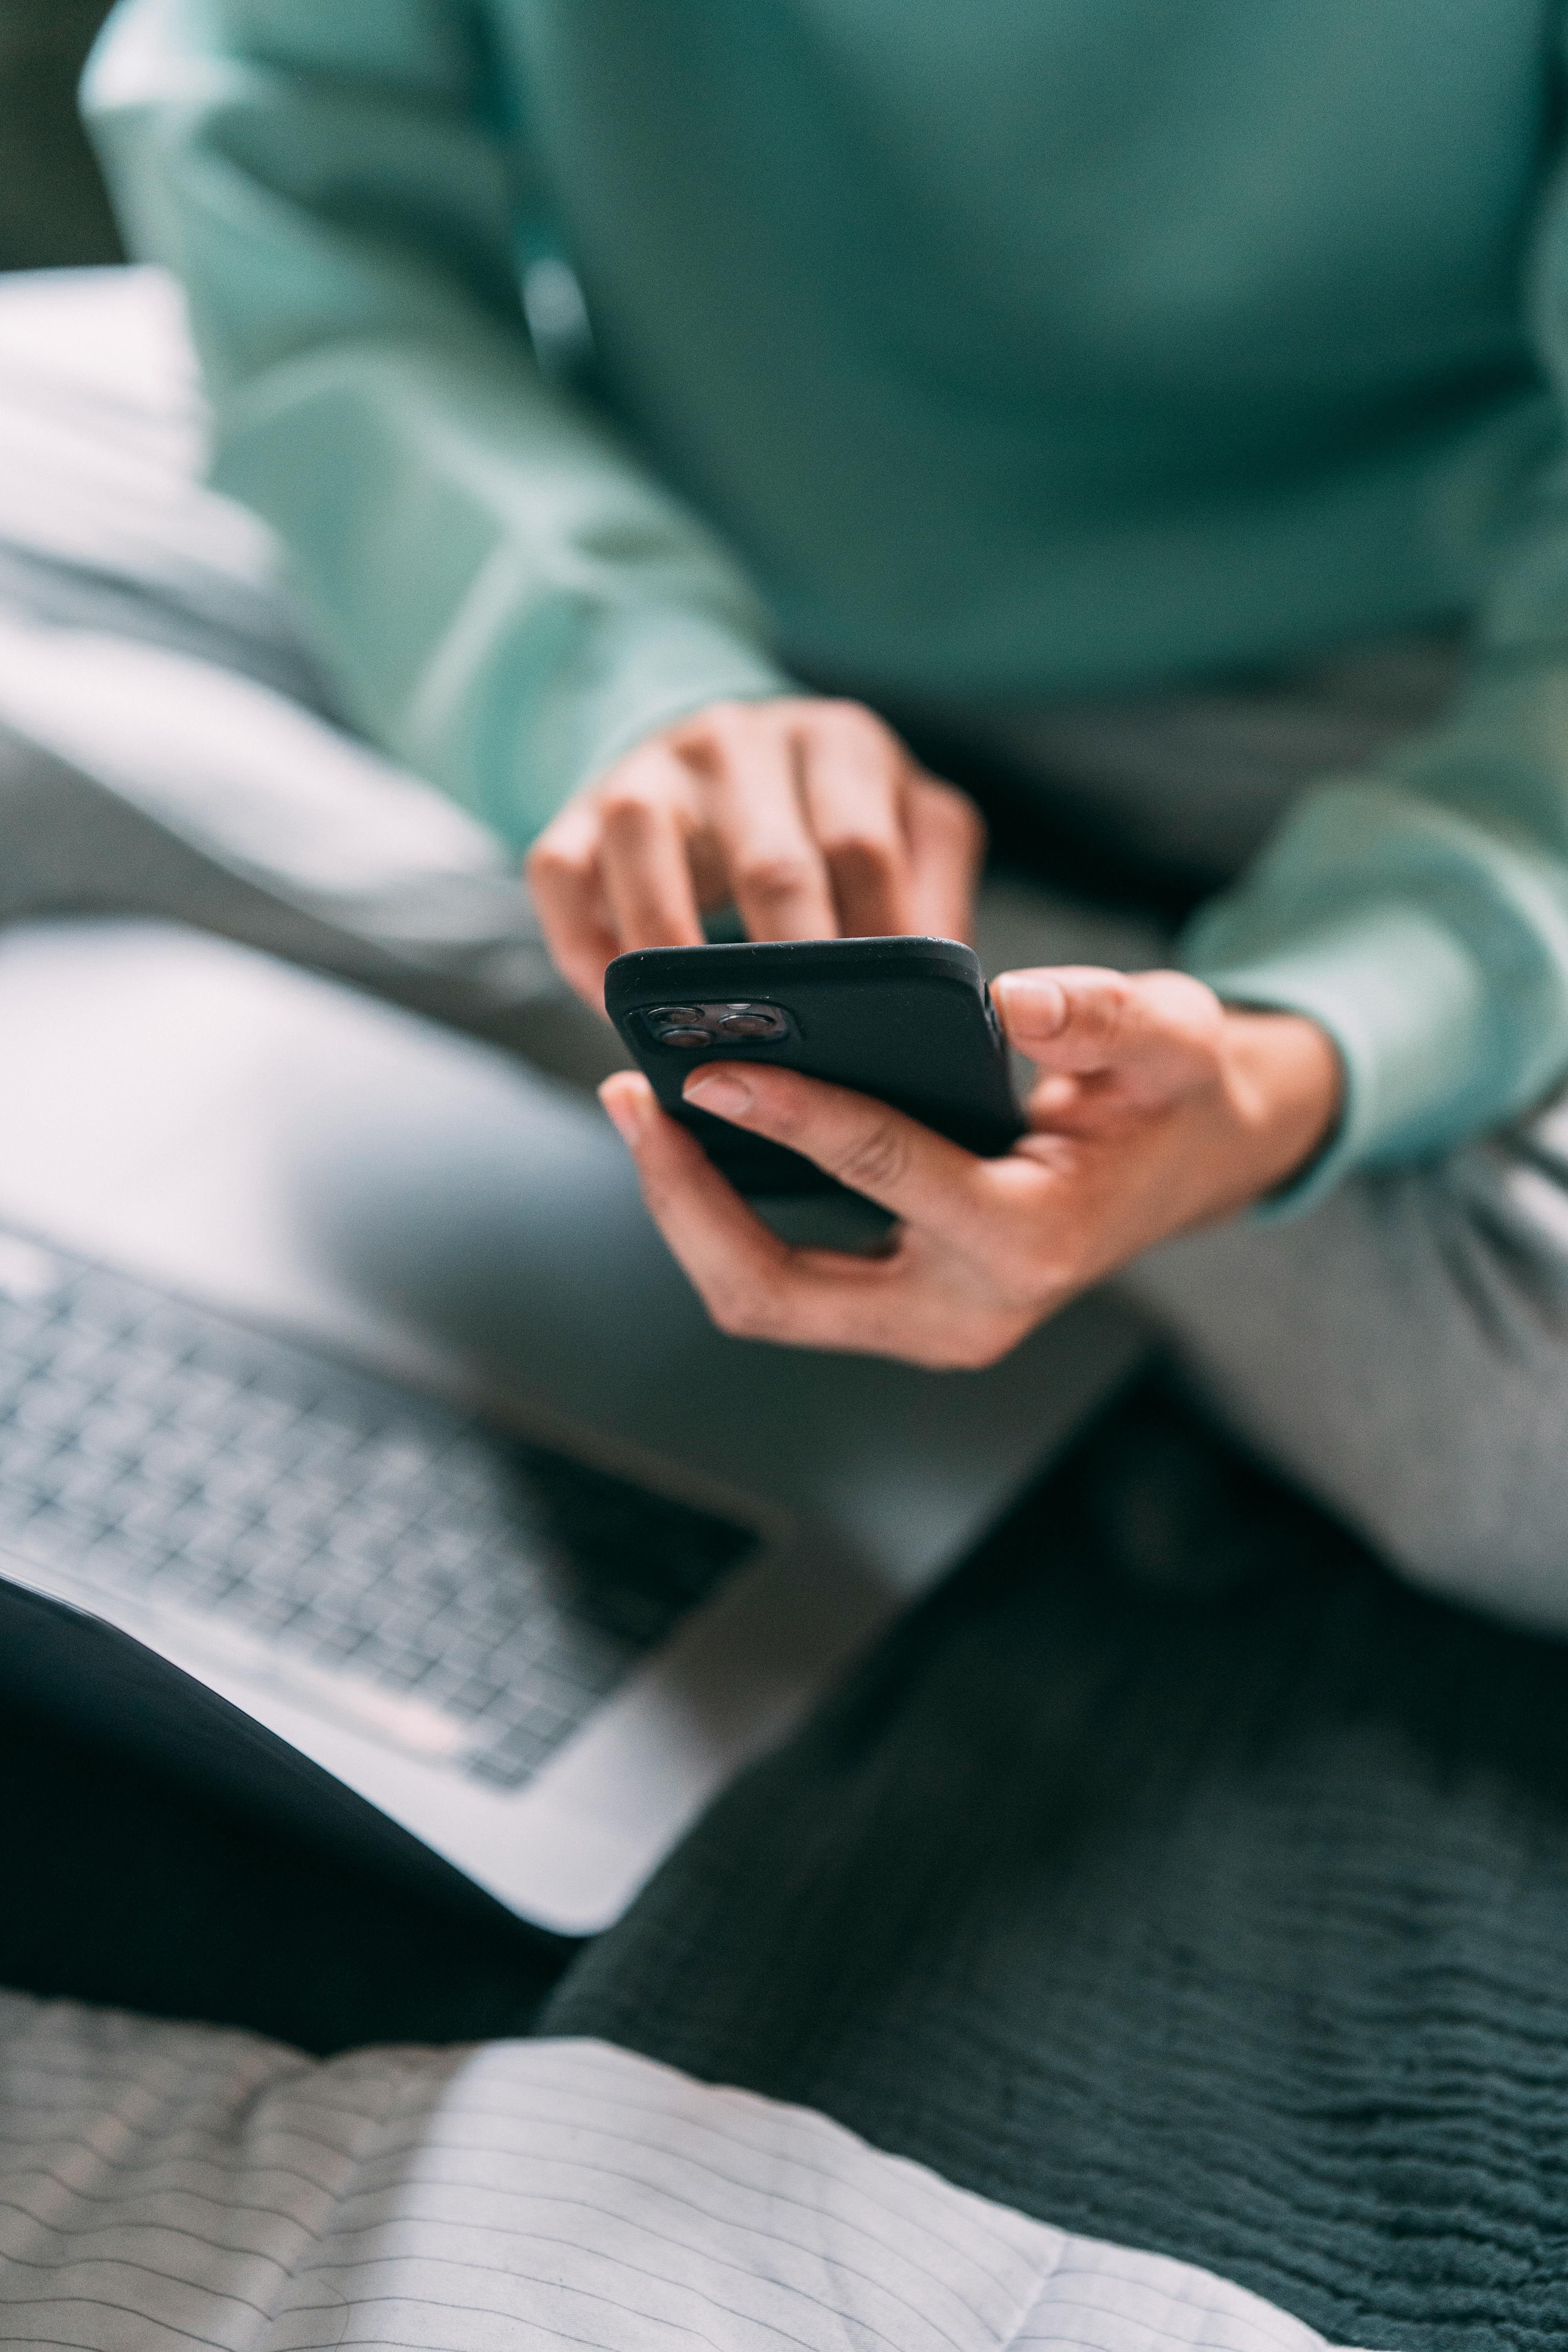 Someone using their phone with a laptop open in front | Source: Pexels